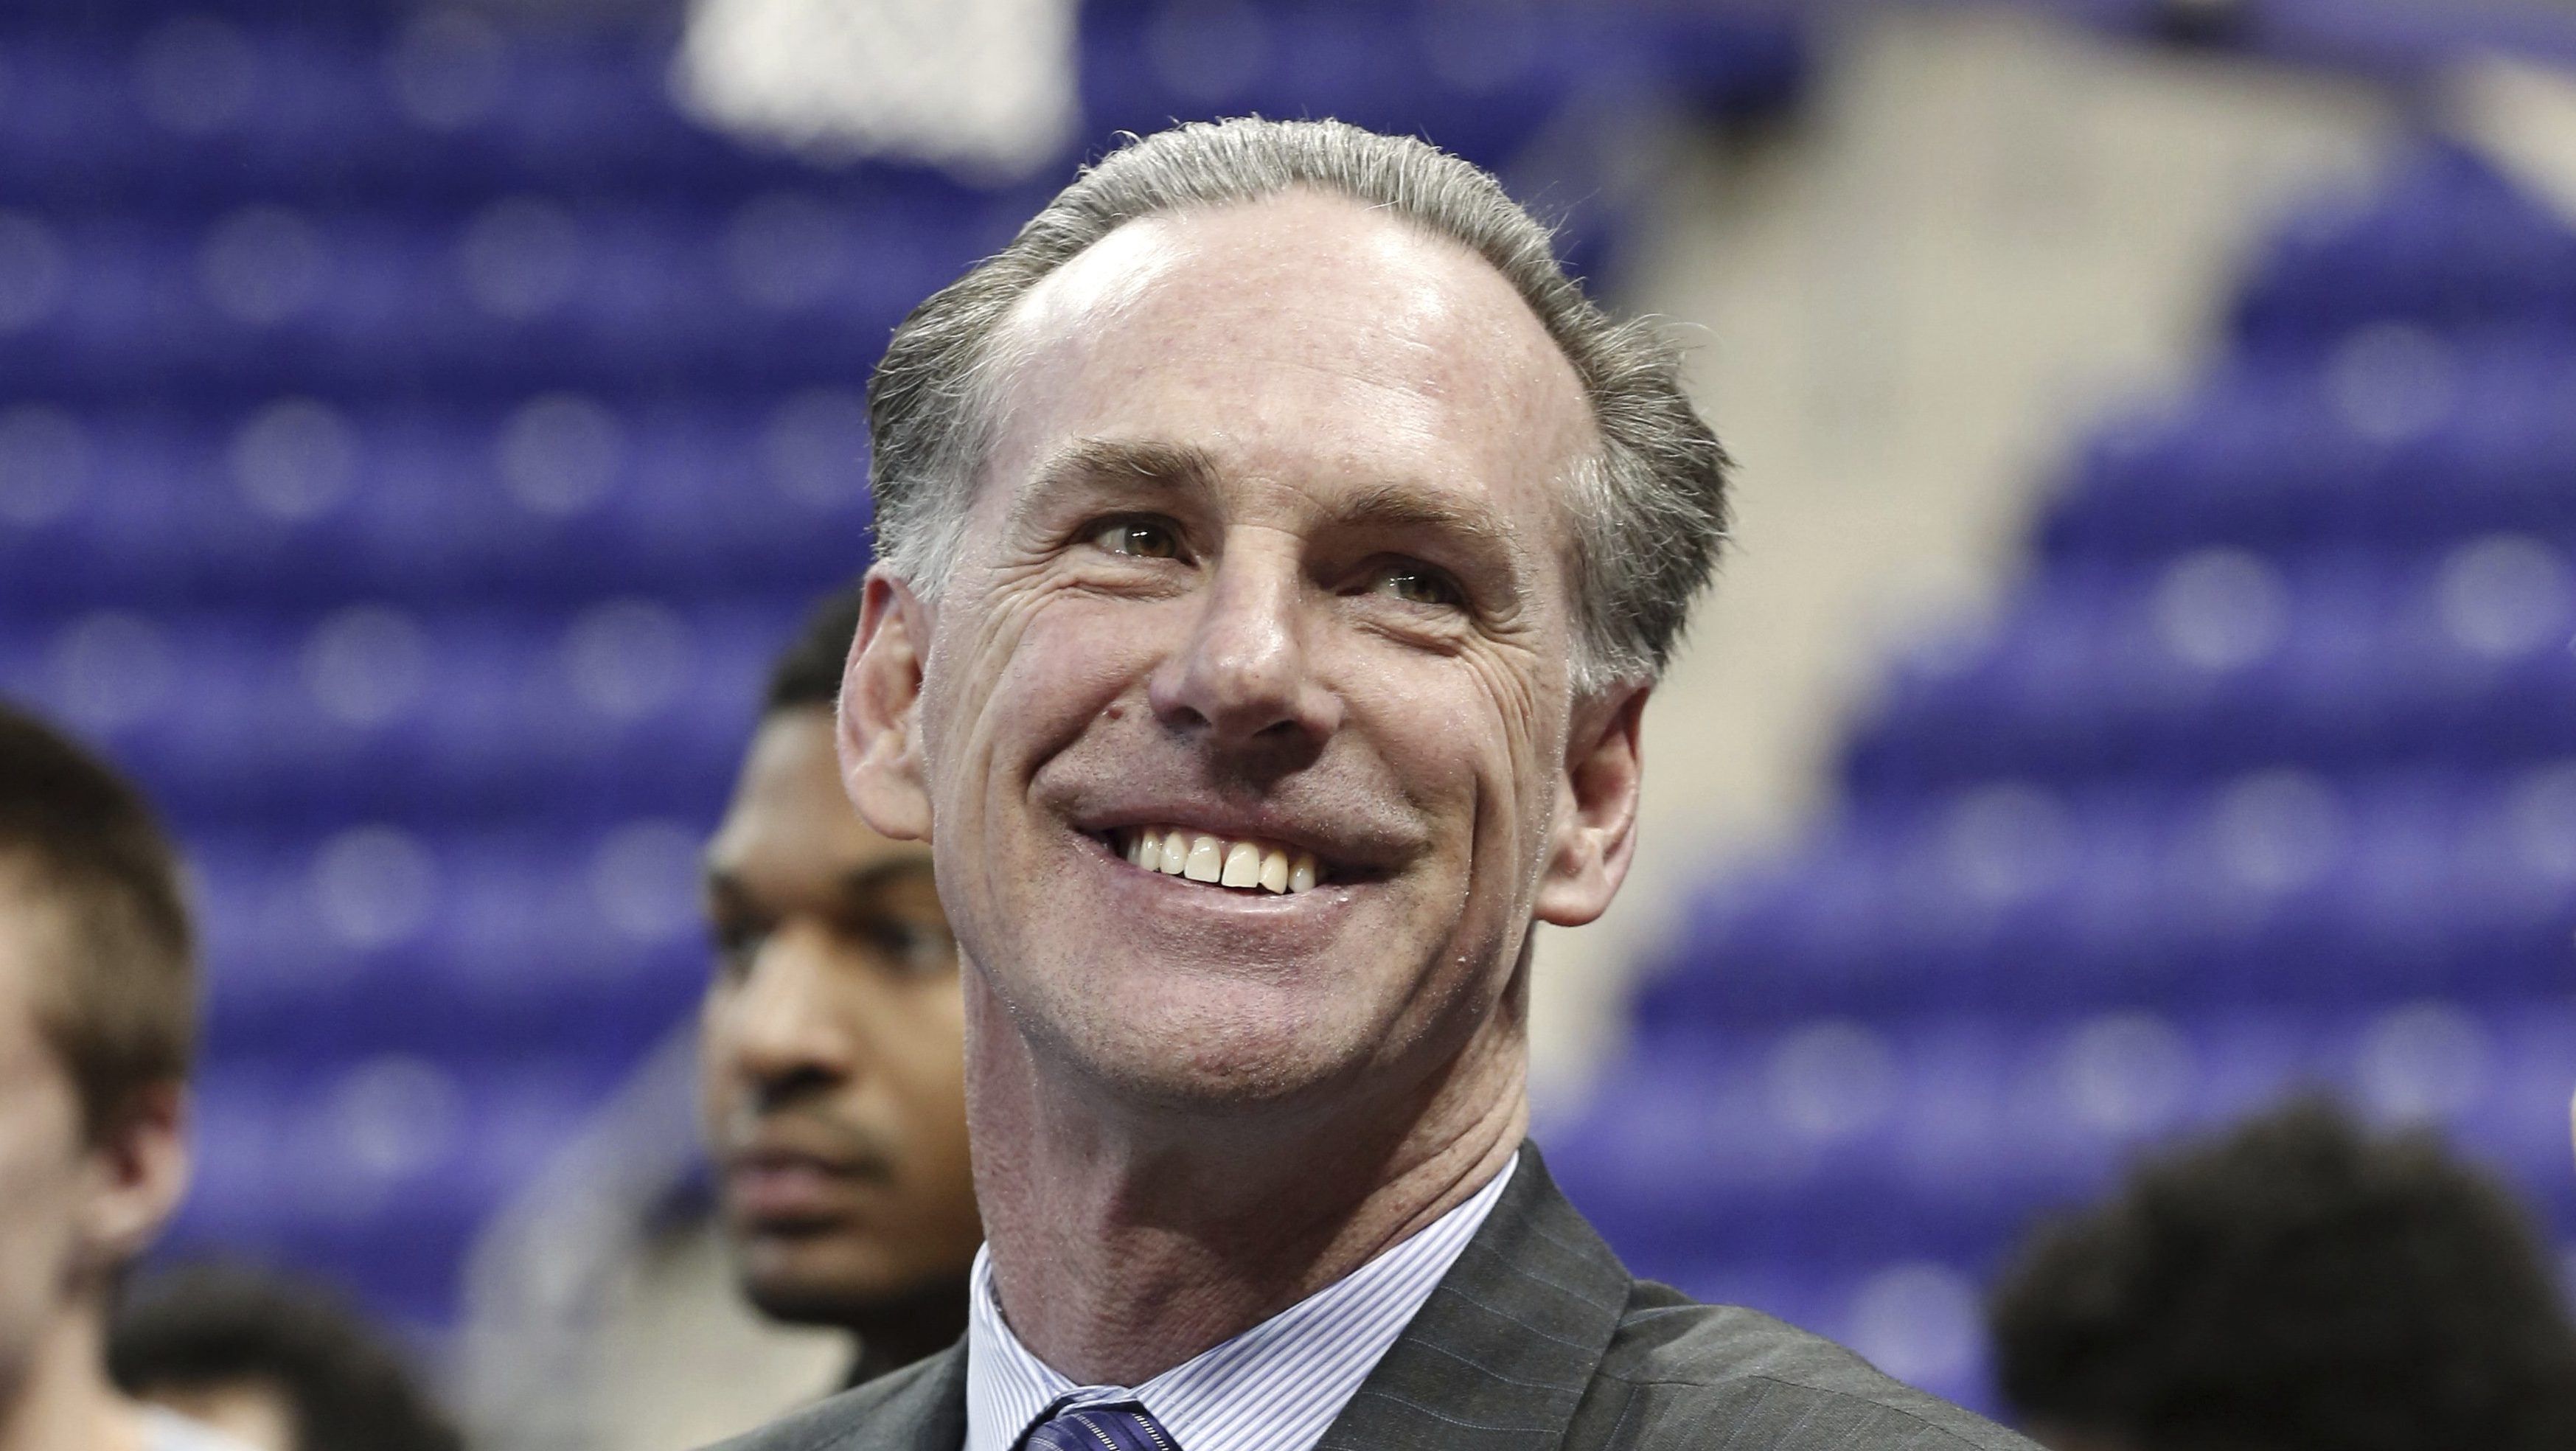 FILE - In this March 22,, 2016, file photo, TCU's new men's basketball coach Jamie Dixon acknowledges the crowds response as he was introduced during an NCAA college basketball news conference, in Fort Worth, Texas. Dixon’s Horned Frogs have started 4-0 in his first season but have gone 8-64 in Big 12 play over the past four years. (Ron T. Ennis/Star-Telegram via AP, File)